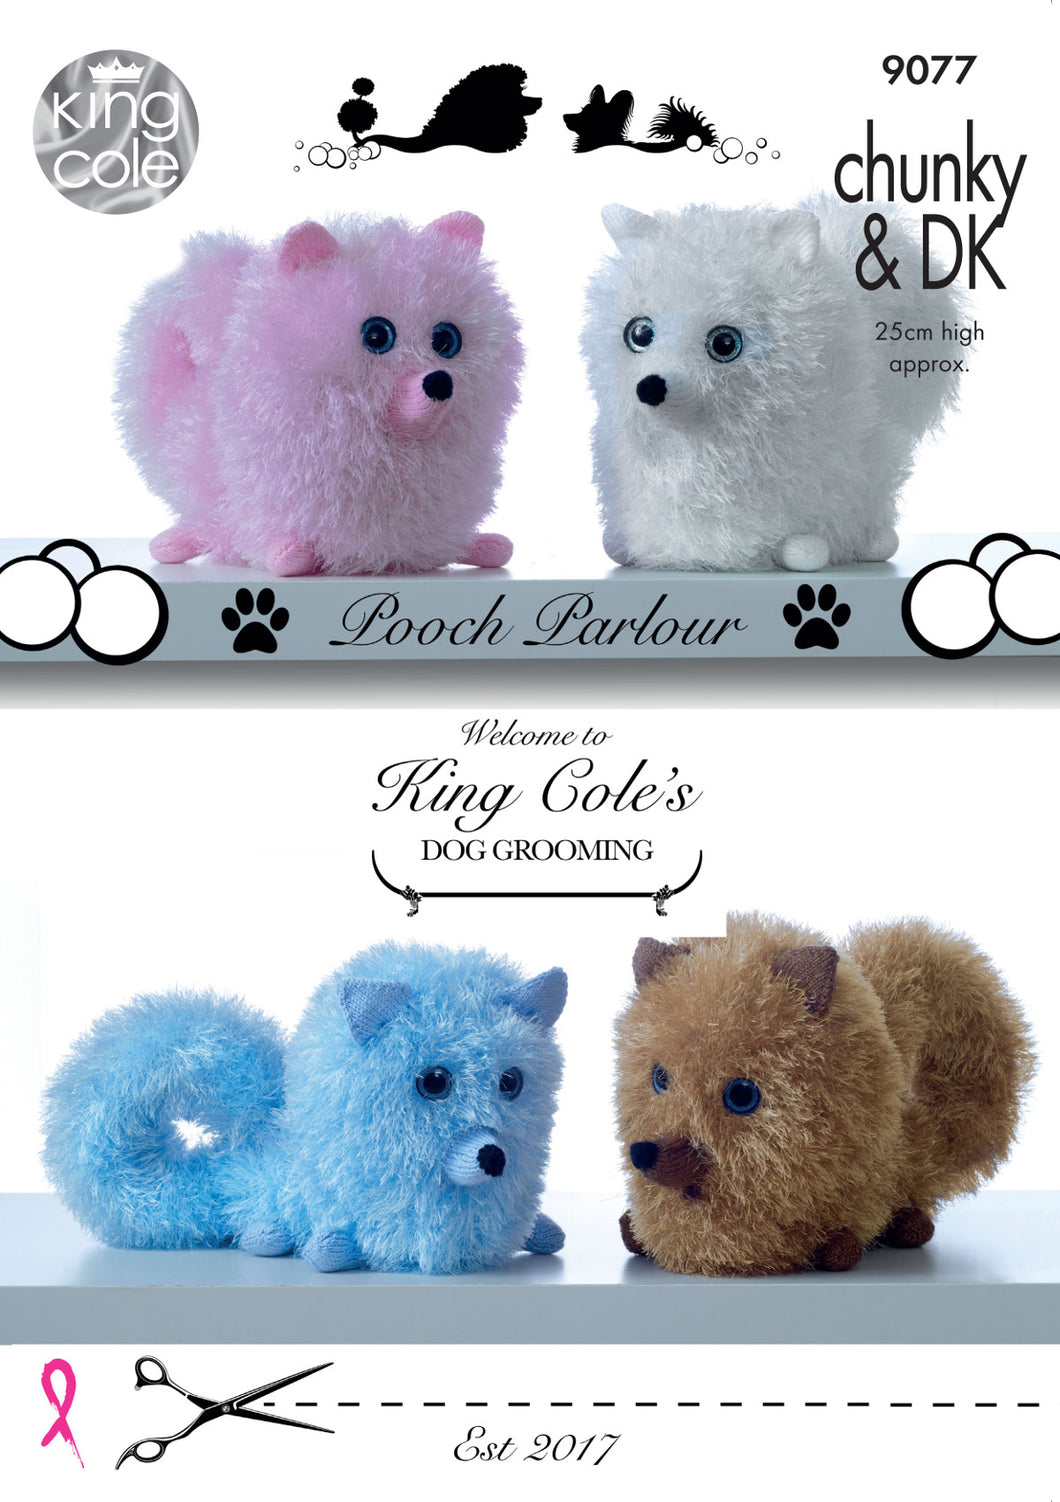 https://images.esellerpro.com/2278/I/146/083/king-cole-chunky-double-knit-knitting-pattern-pooch-parlour-dogs-9077.jpg